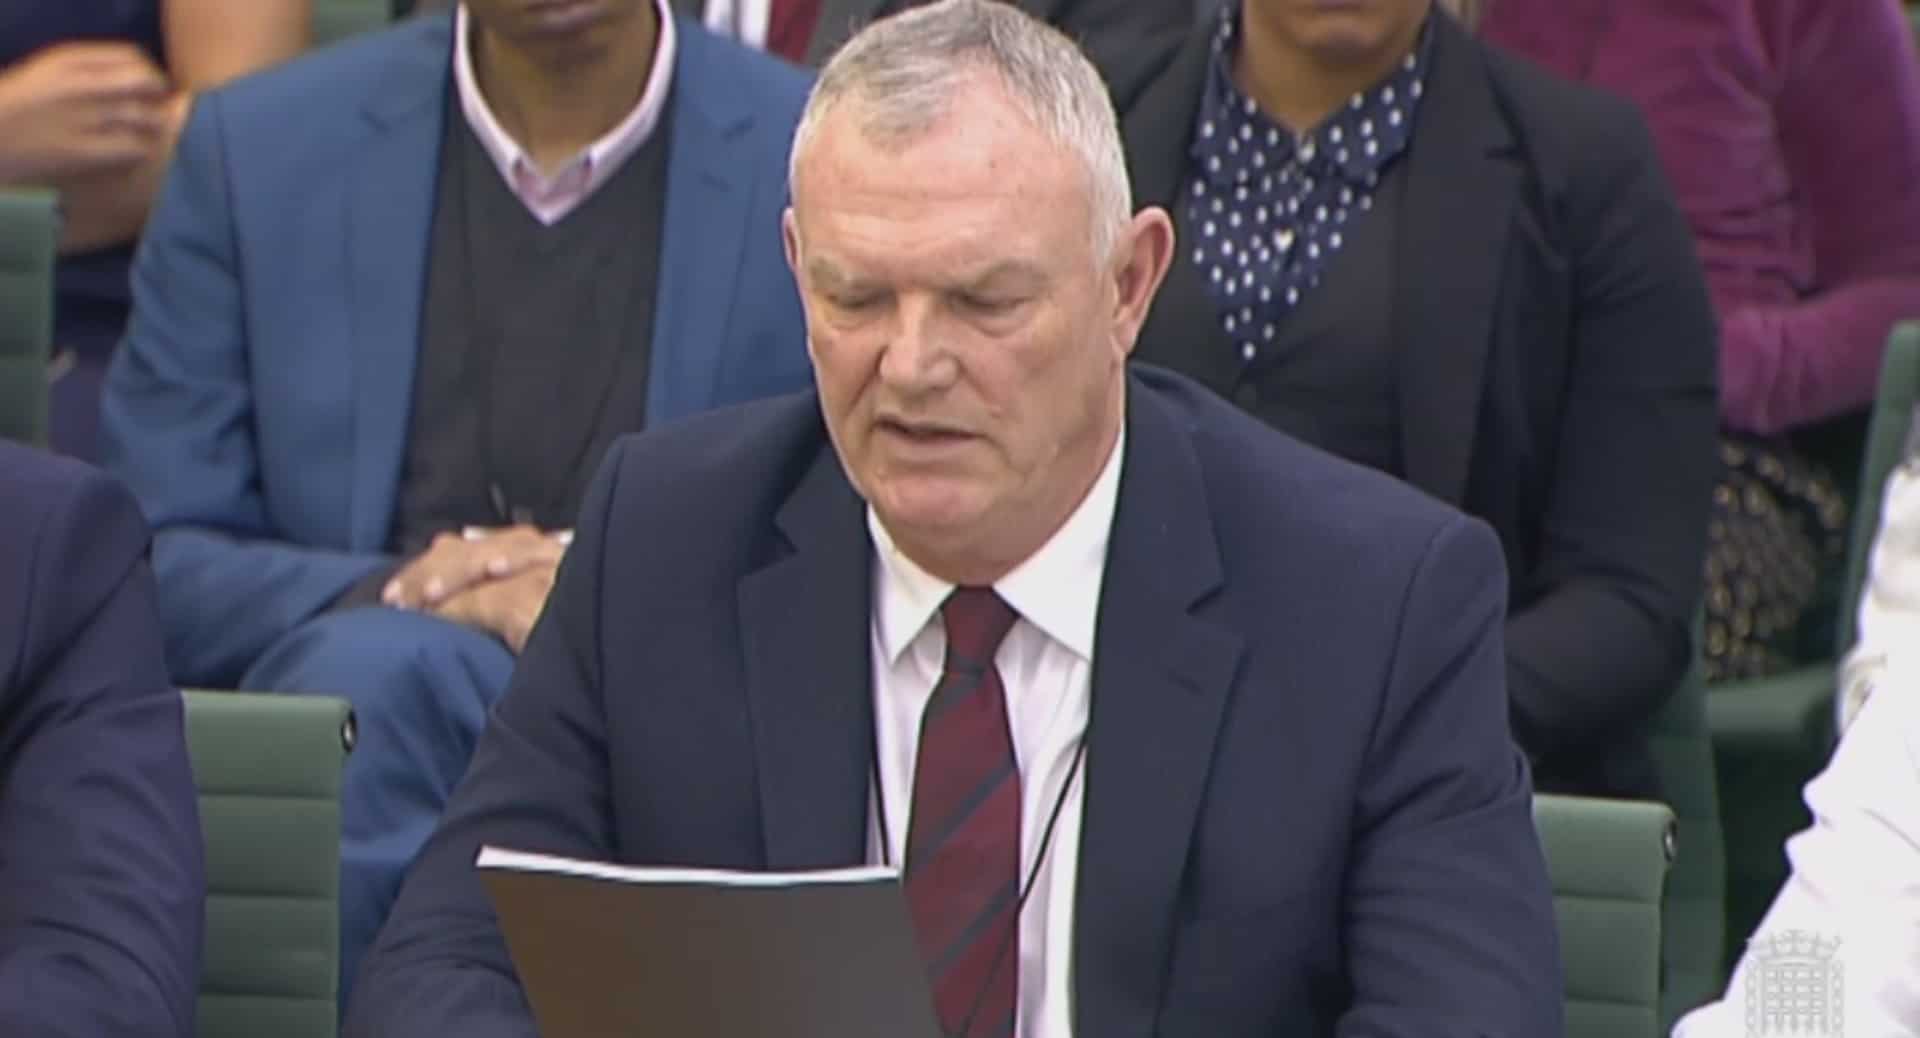 FA chair Greg Clarke resigns after ‘coloured footballers’ remark